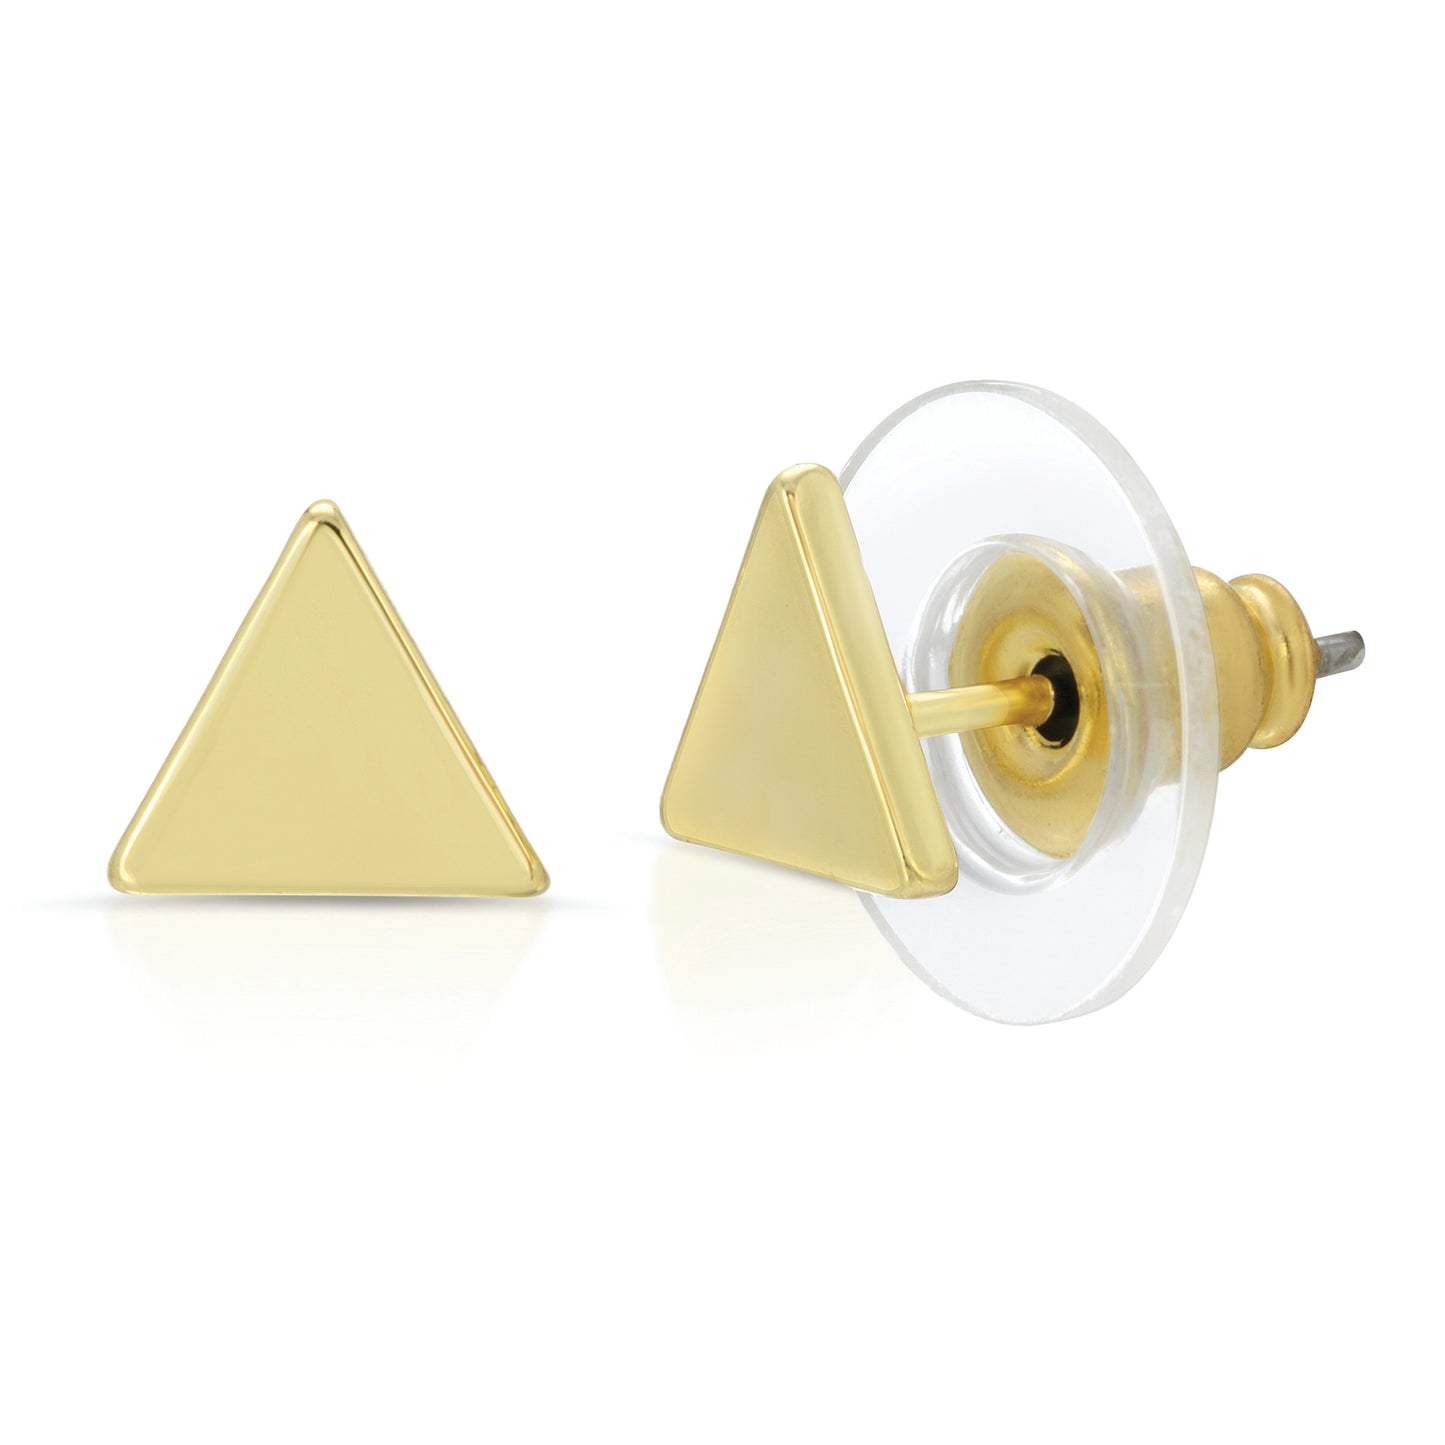 You are Balanced - Gold Triangle Earrings